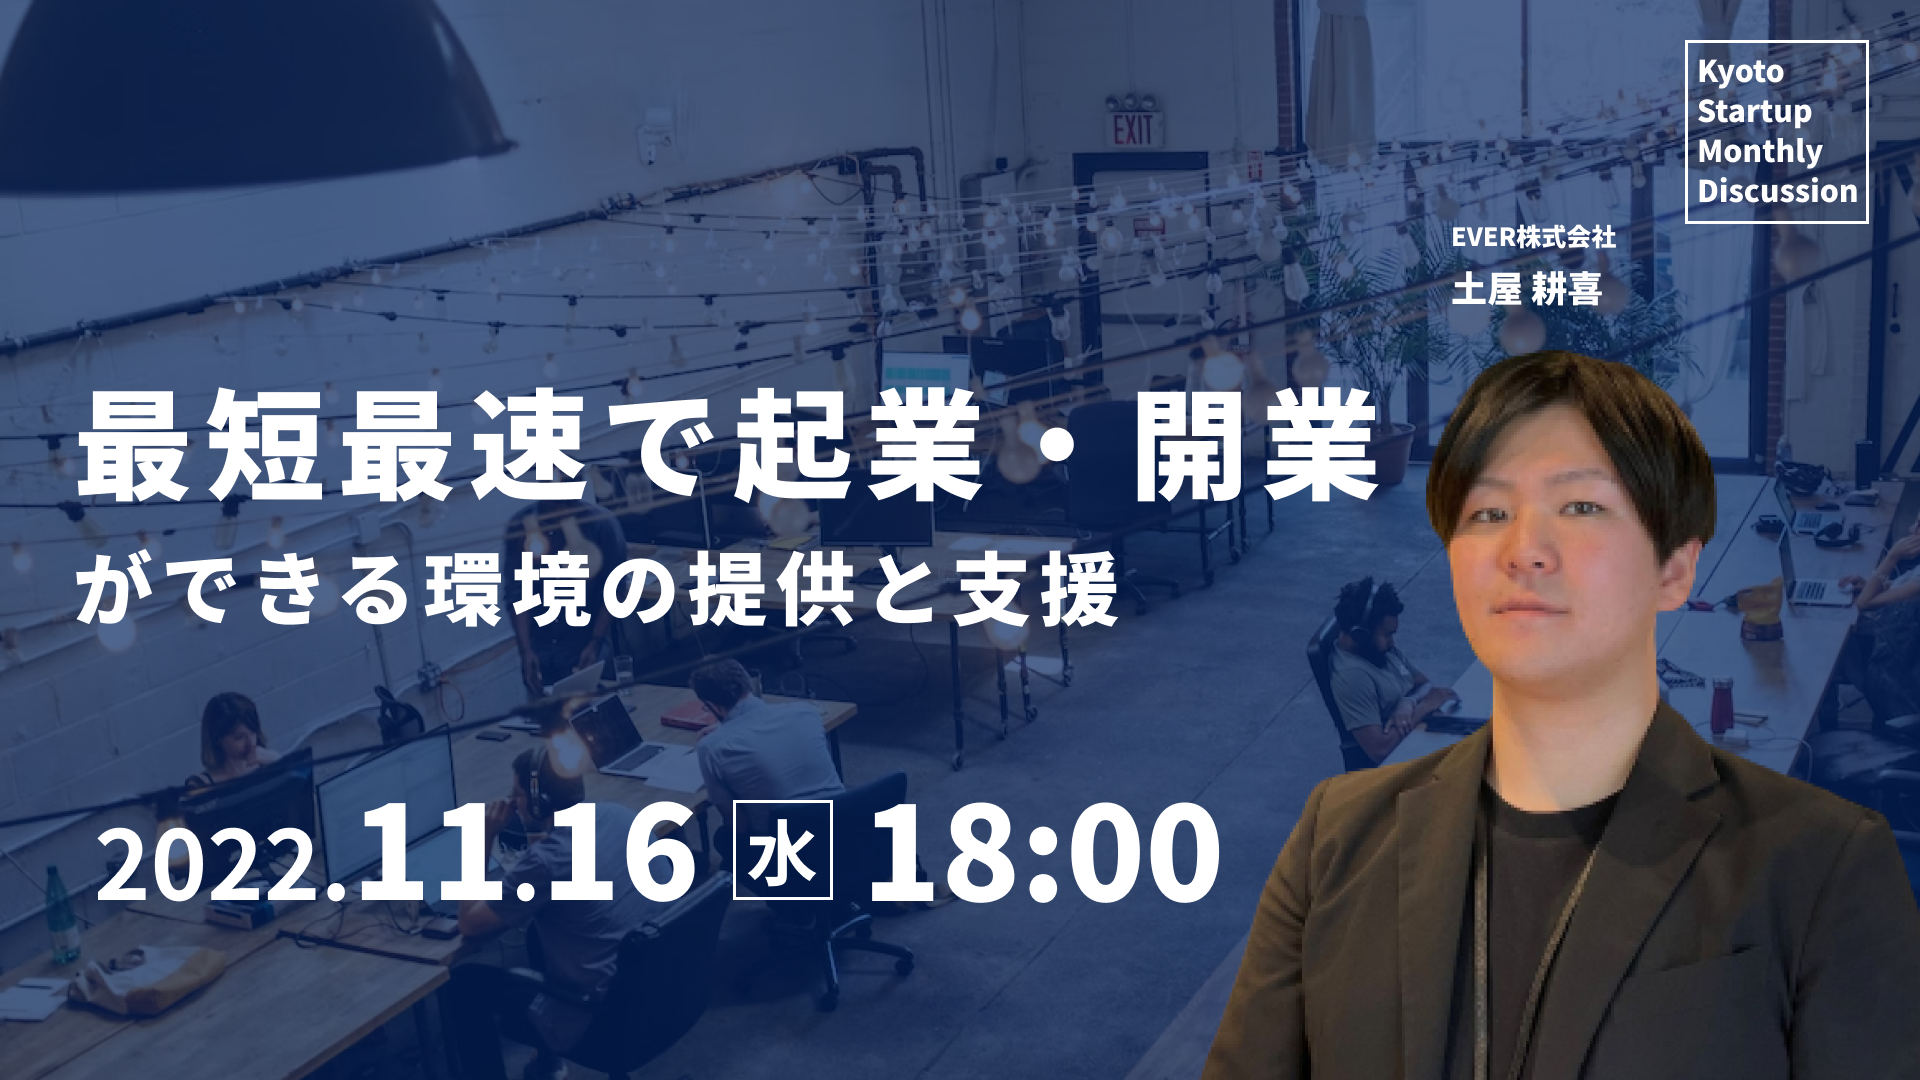 Kyoto Startup Monthly Discussion #18レポート(2022/11/16開催）